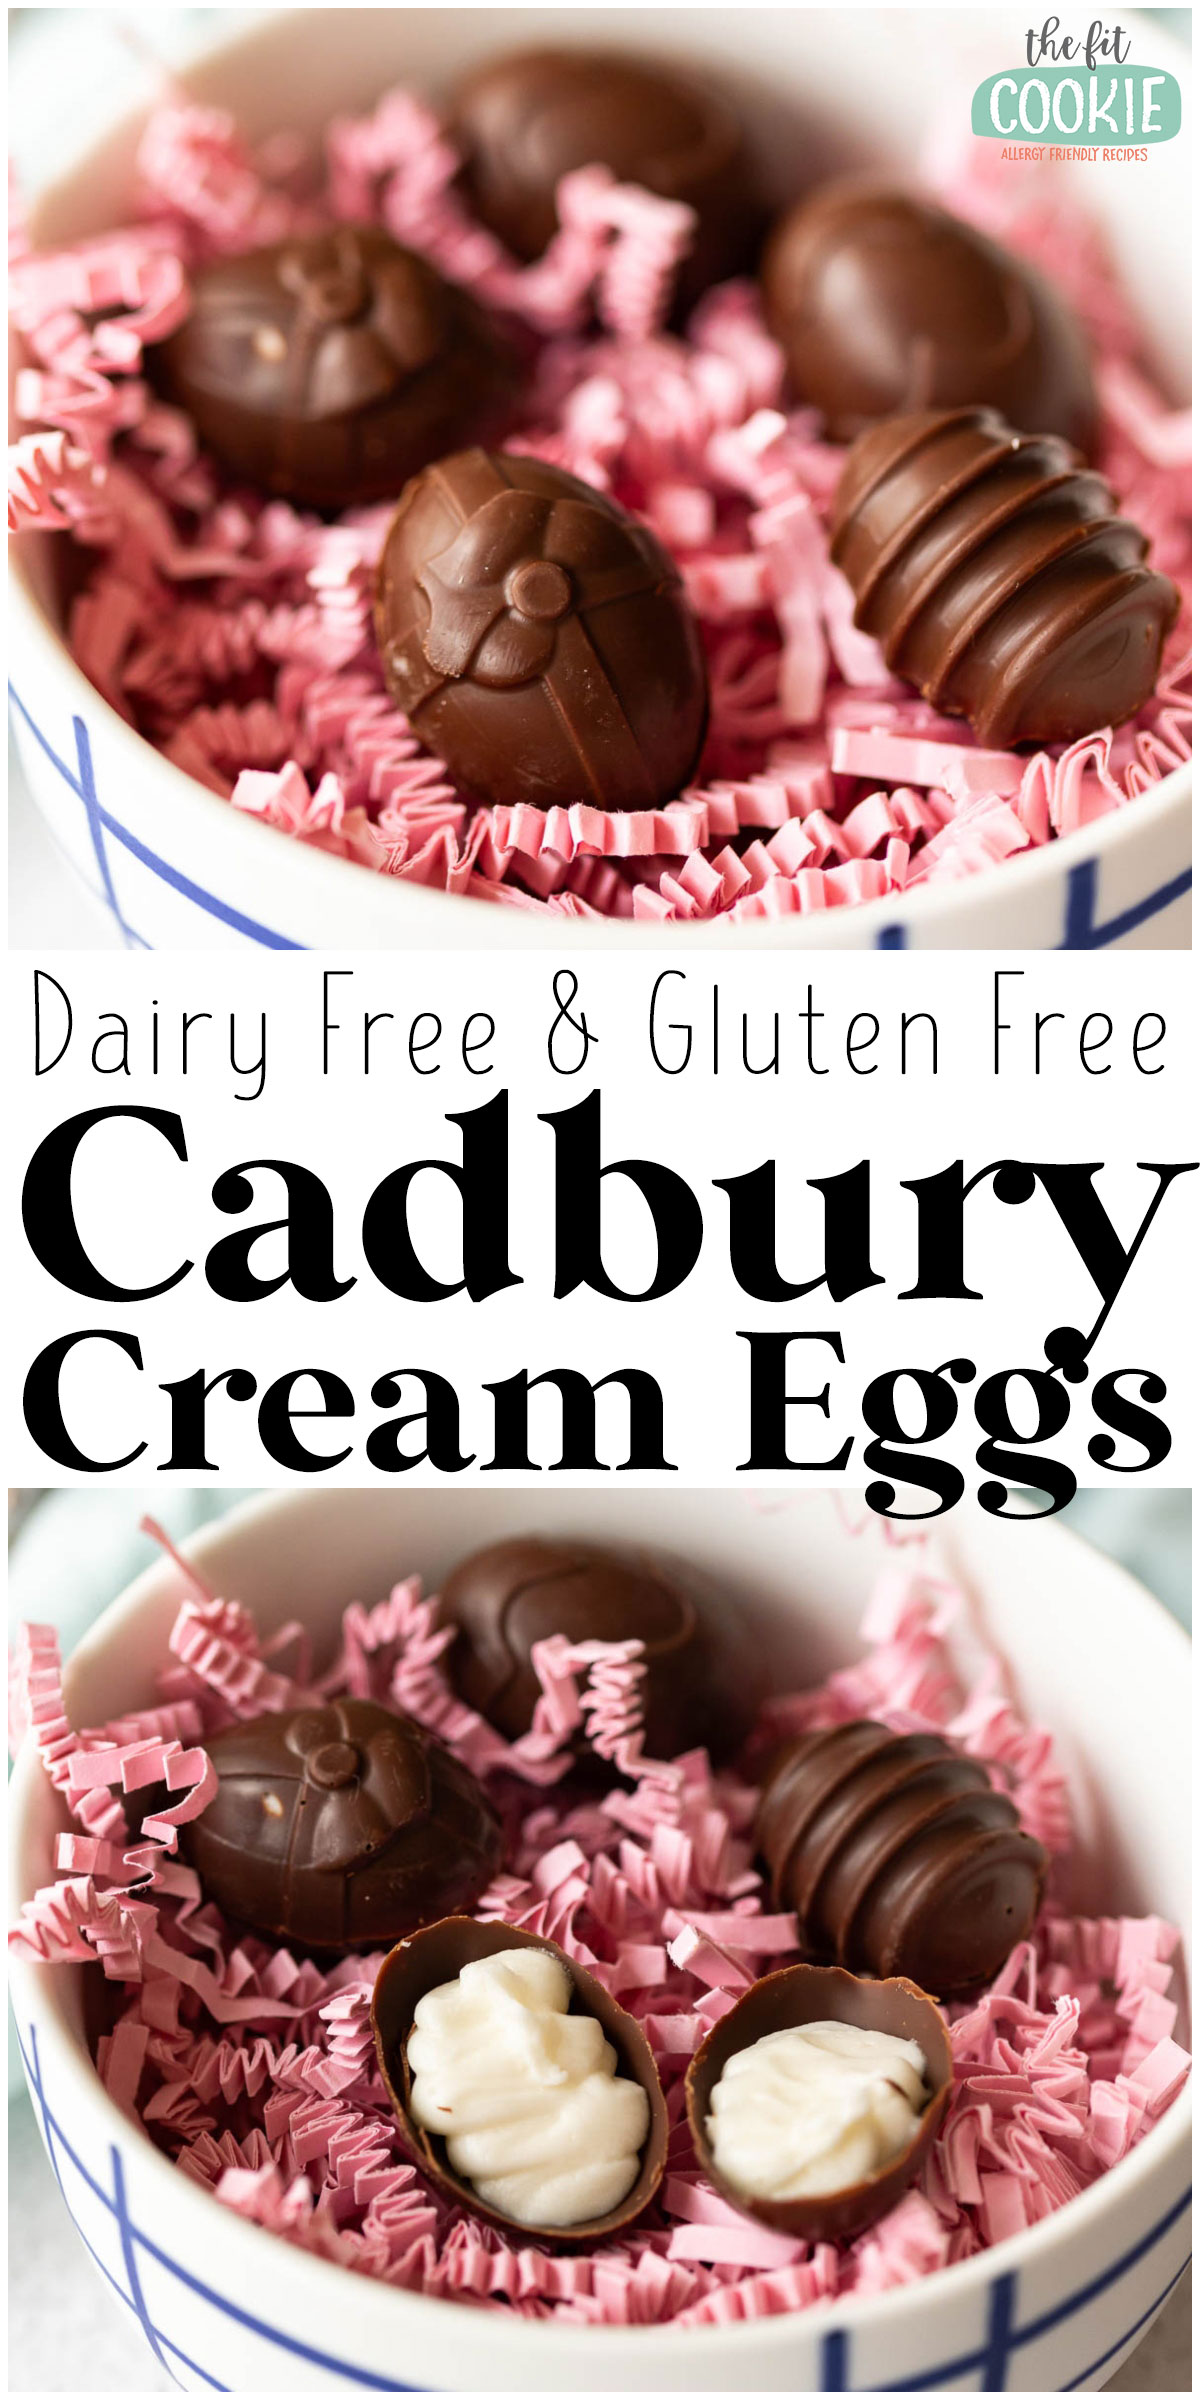 Dairy-free and gluten-free cream eggs on pink shredded paper.